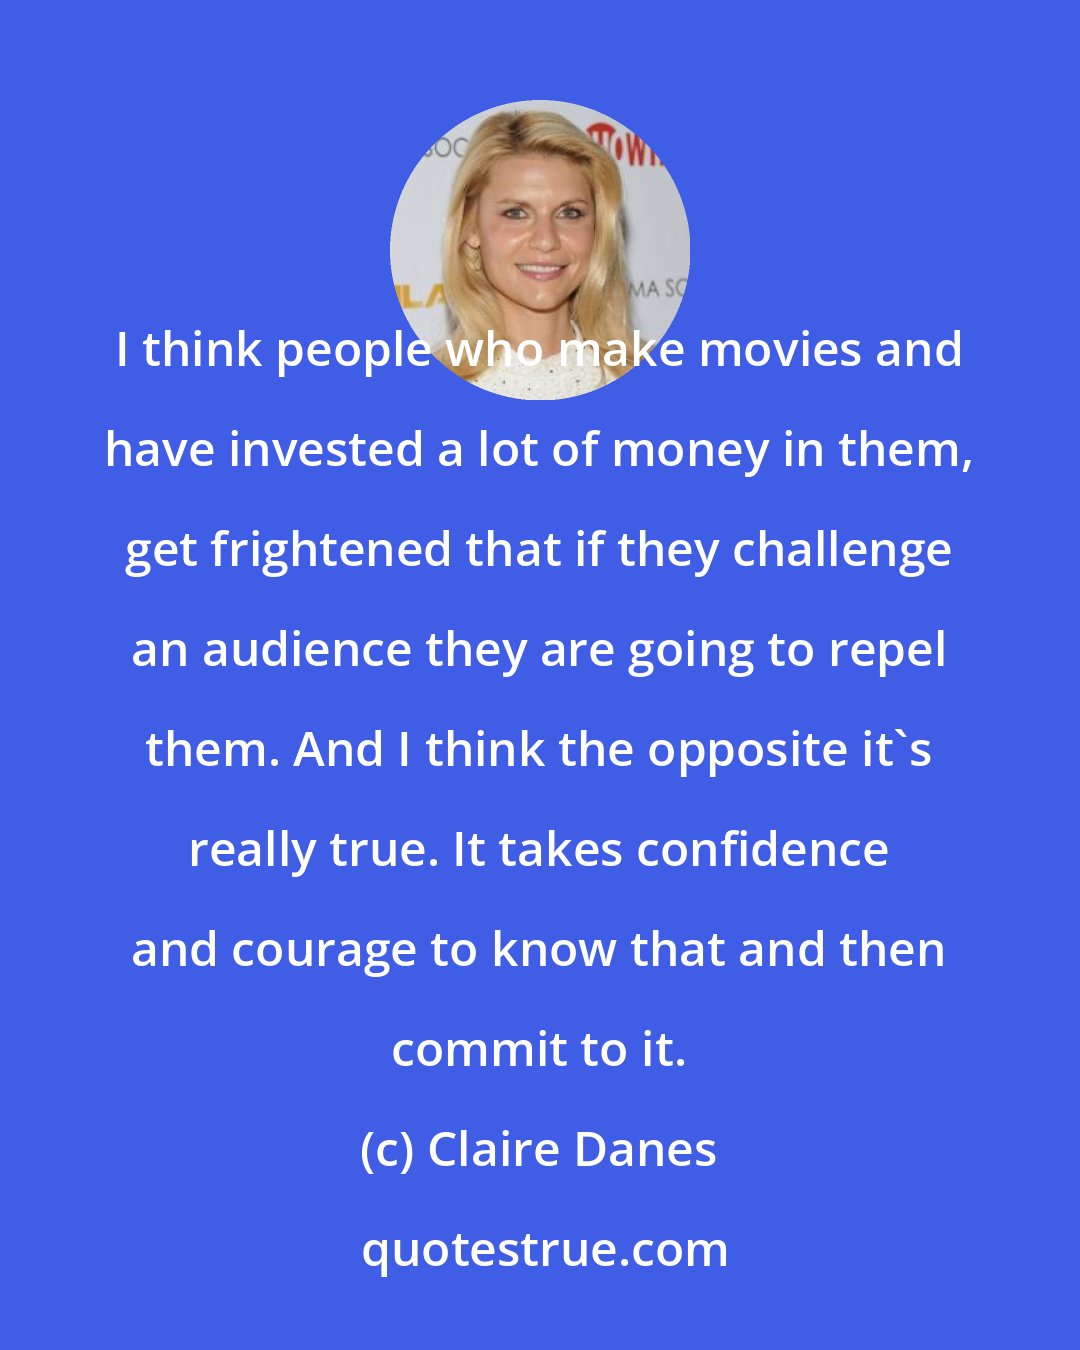 Claire Danes: I think people who make movies and have invested a lot of money in them, get frightened that if they challenge an audience they are going to repel them. And I think the opposite it's really true. It takes confidence and courage to know that and then commit to it.